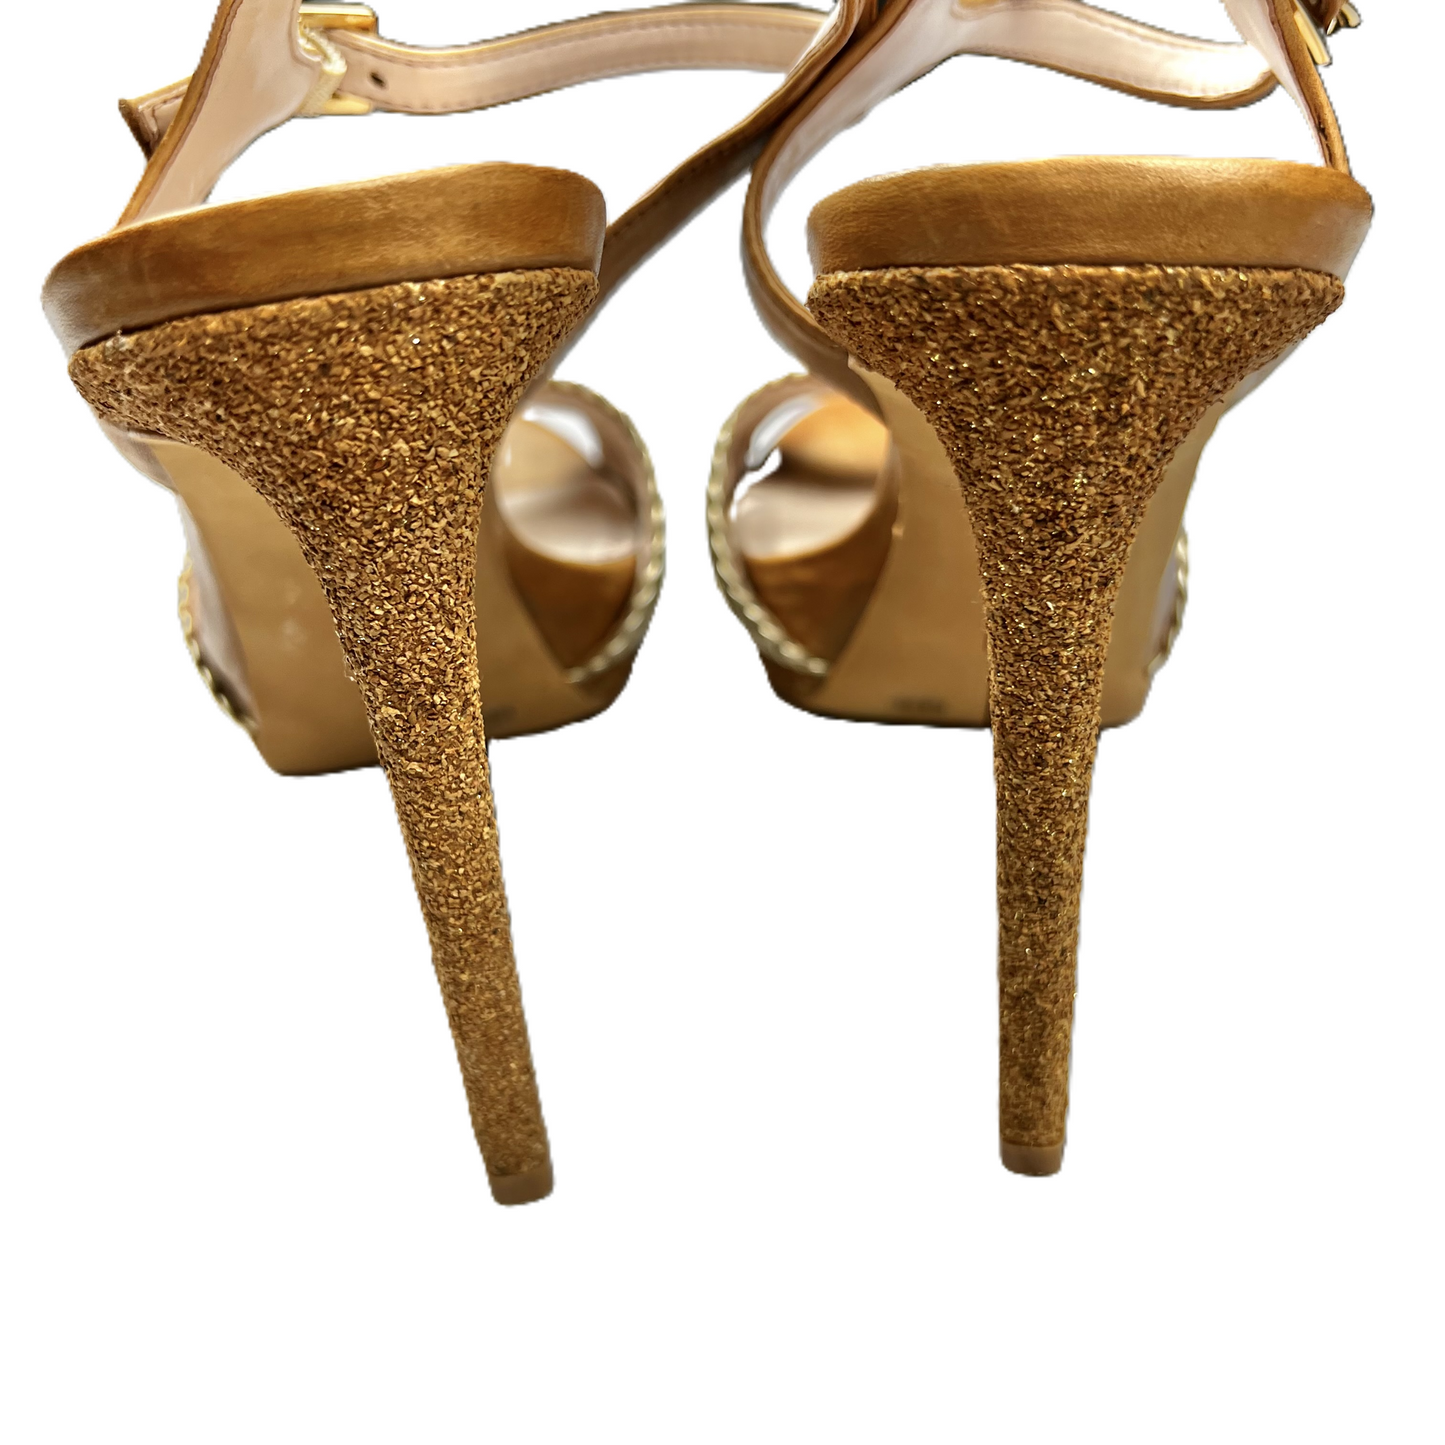 Gold Shoes Heels Platform By Vince Camuto, Size: 9.5